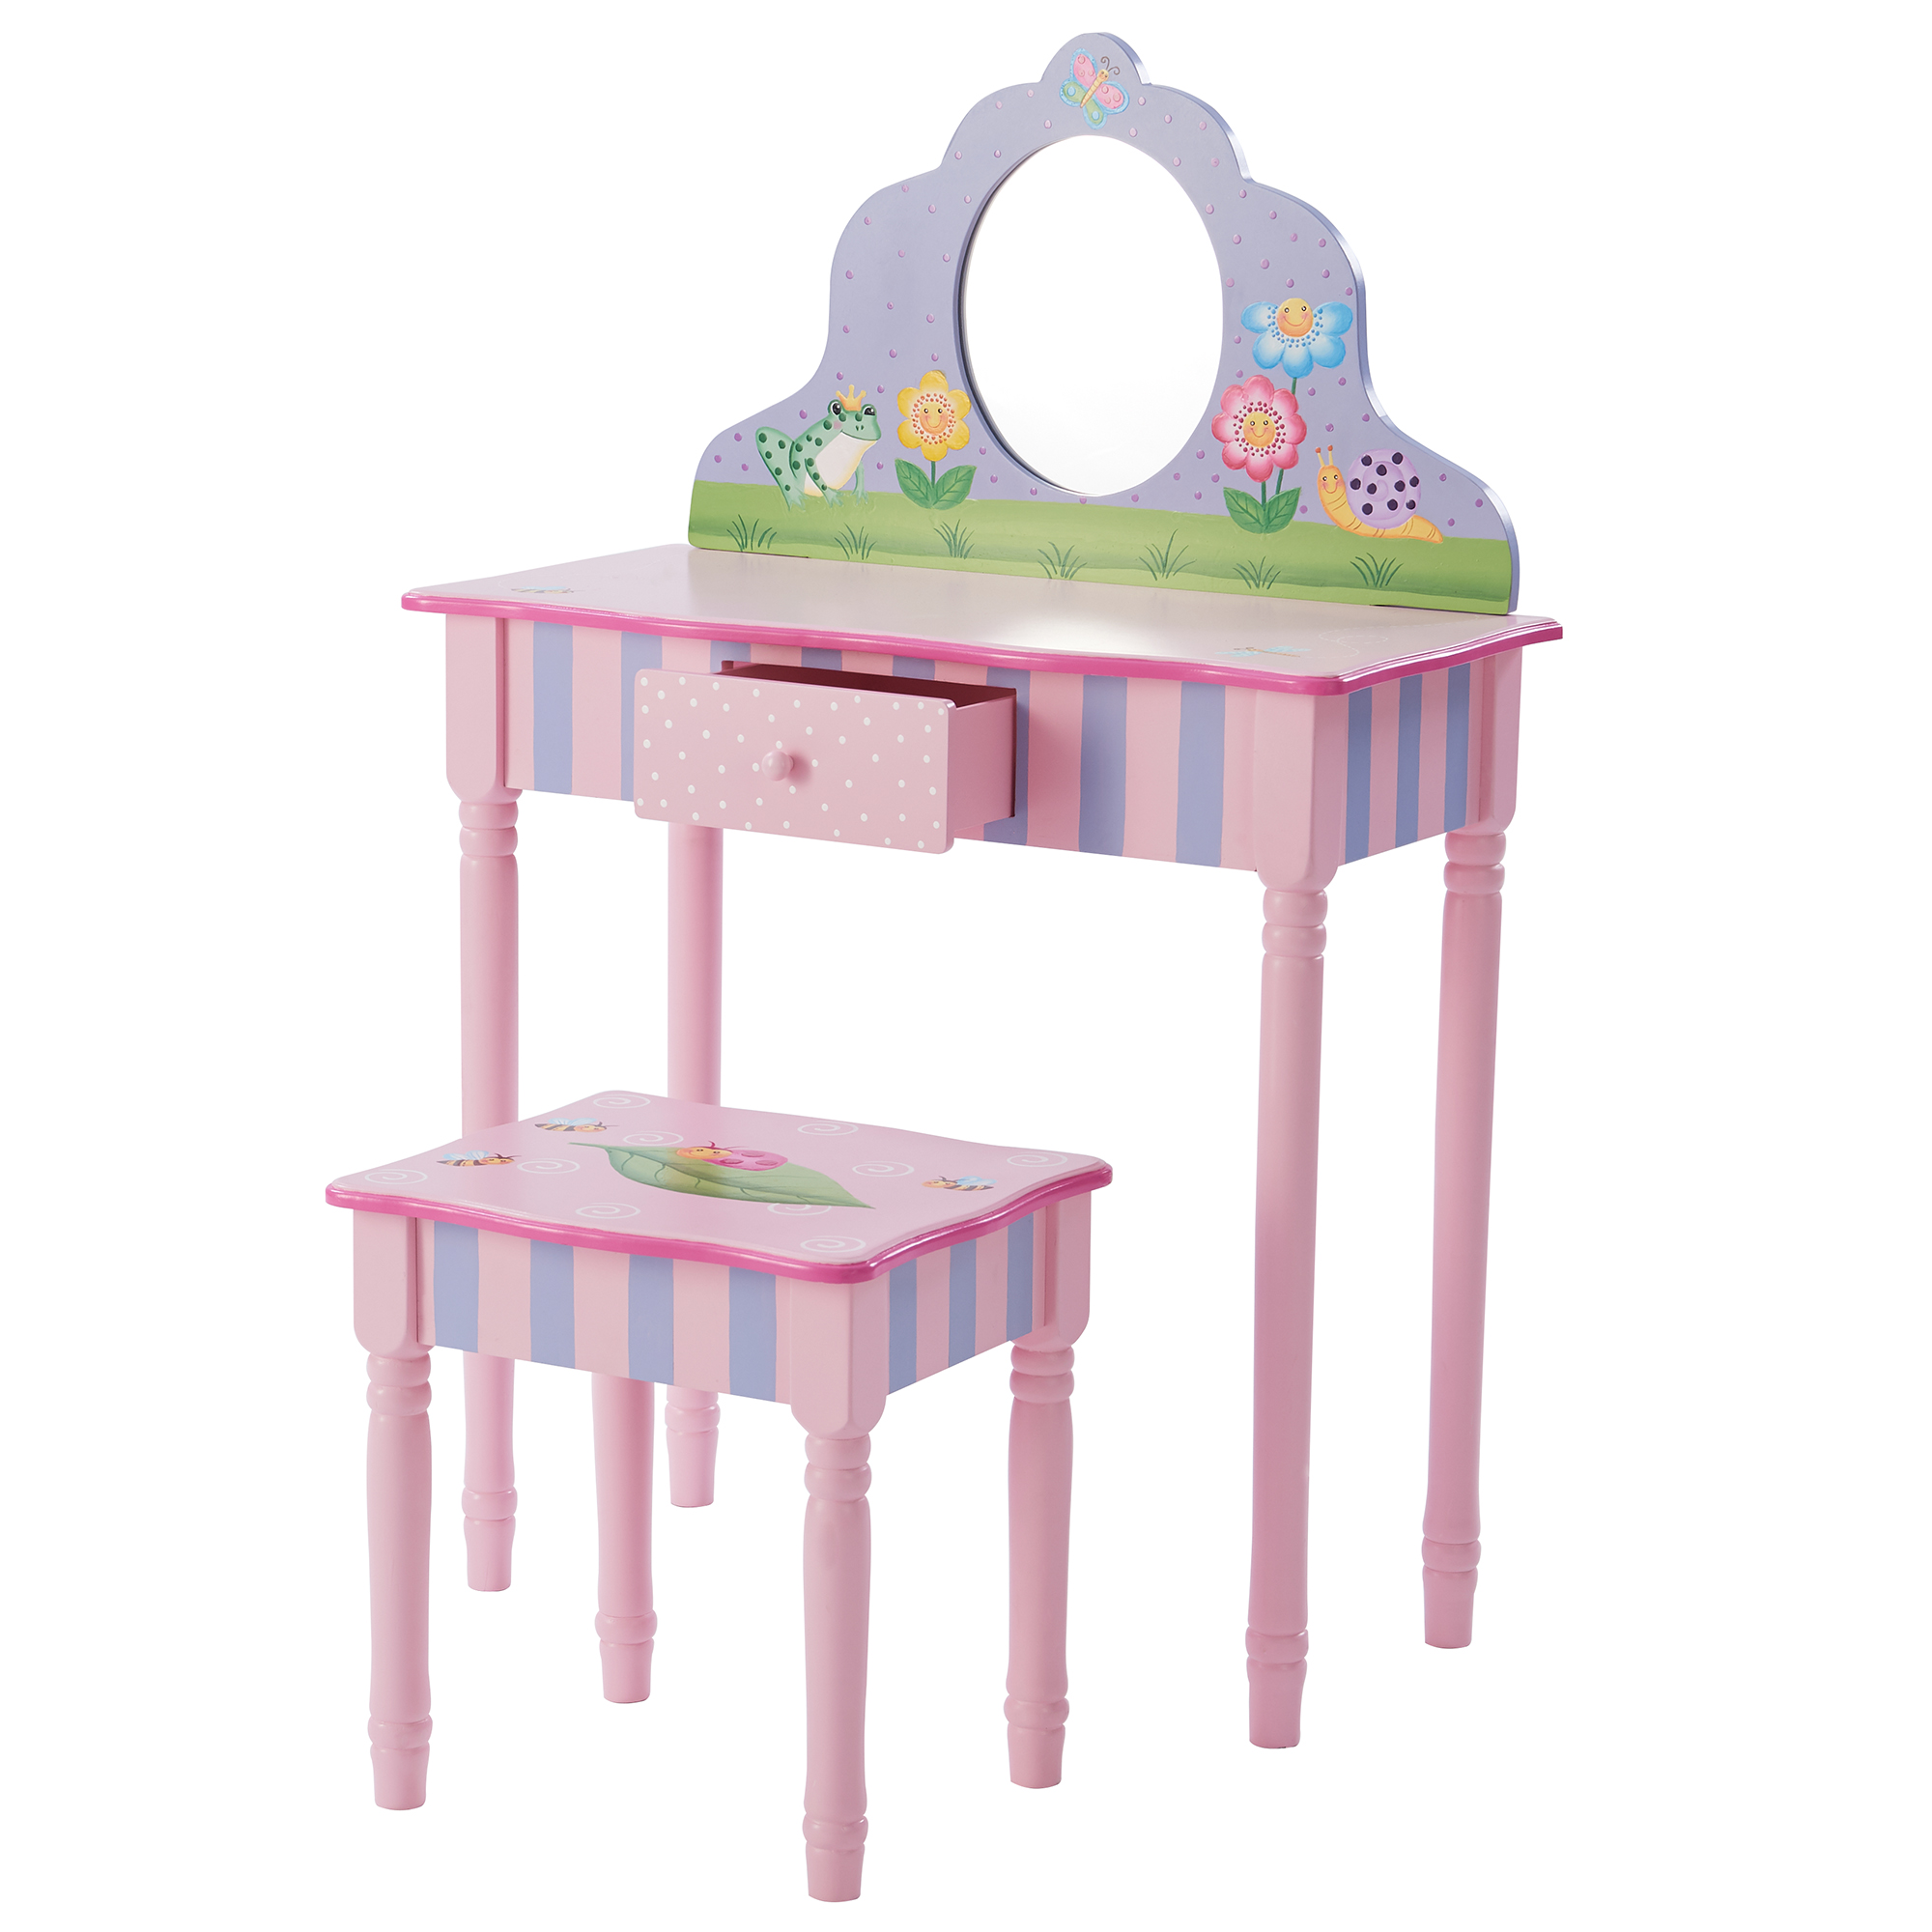 Fantasy Fields by Teamson Kids- Magic Garden Cute Children's Toddler Wooden Vanity Table Set/ Makeup Desk with Stool, Pink/Purple - image 1 of 10